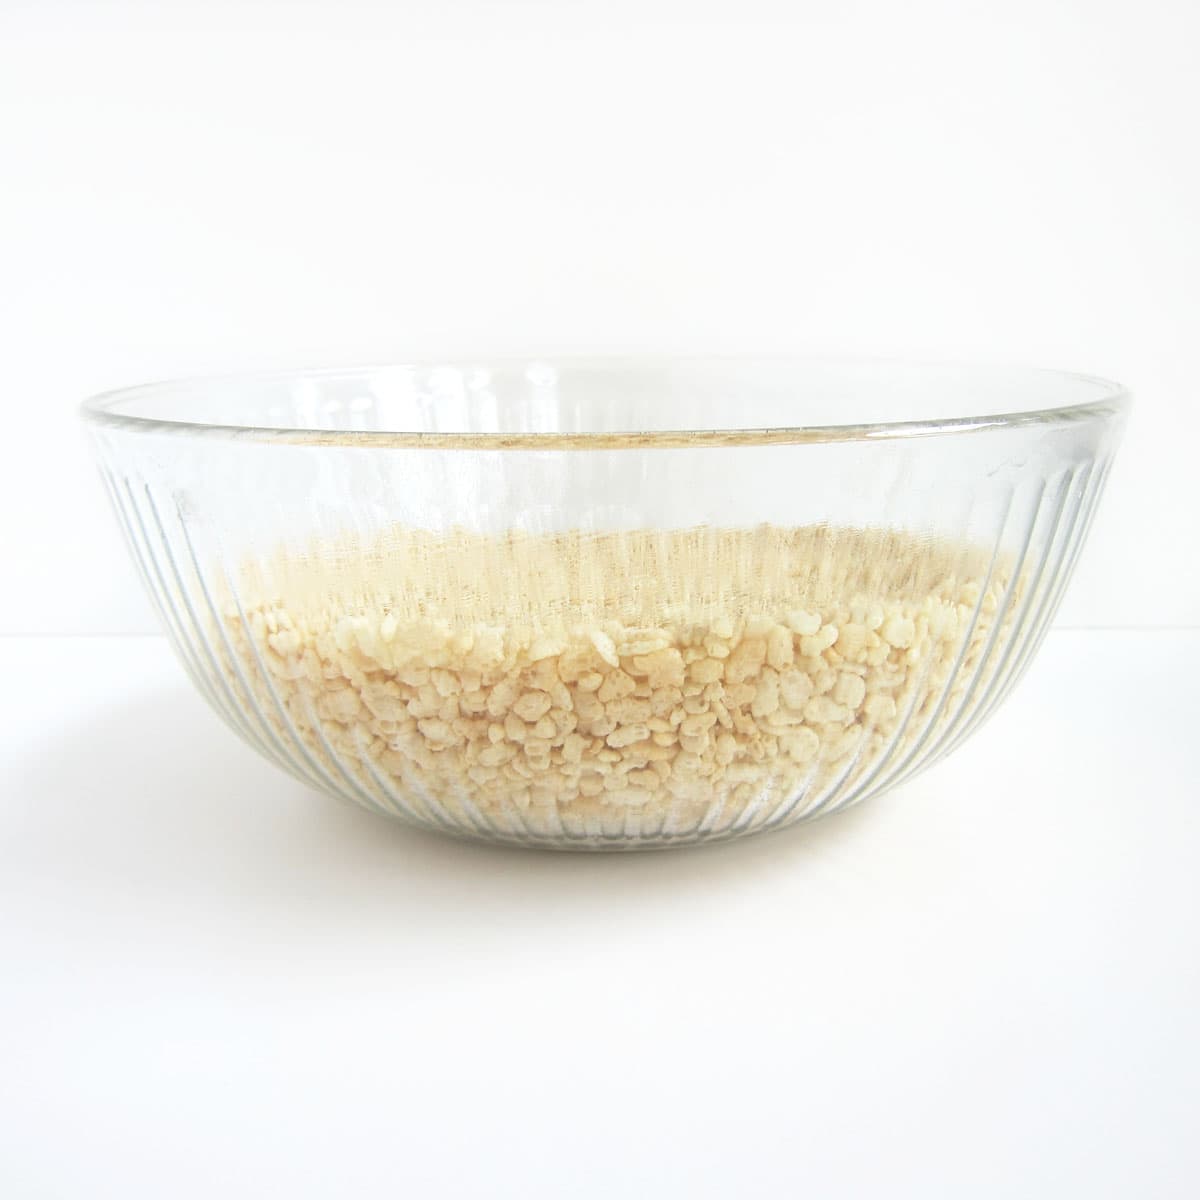 Rice Krispies cereal in a mixing bowl.